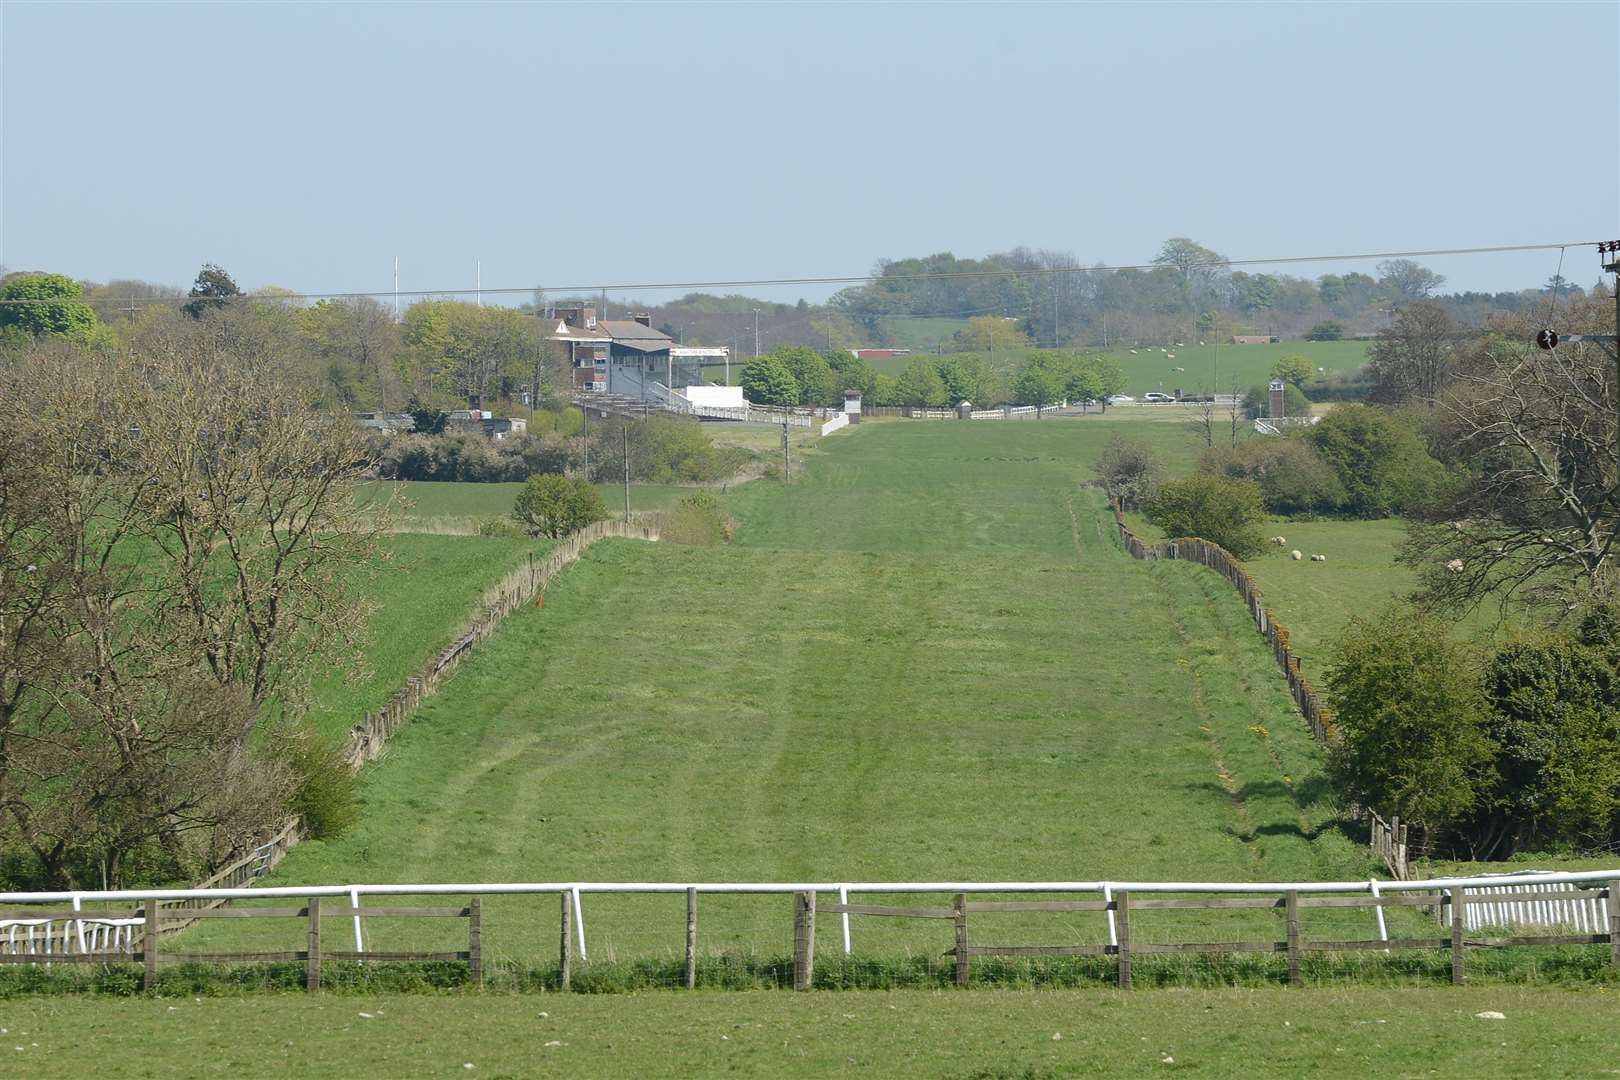 Folkestone Racecourse owners have confirmed they are talking with Shepway council but have not revealed the extent of their plans